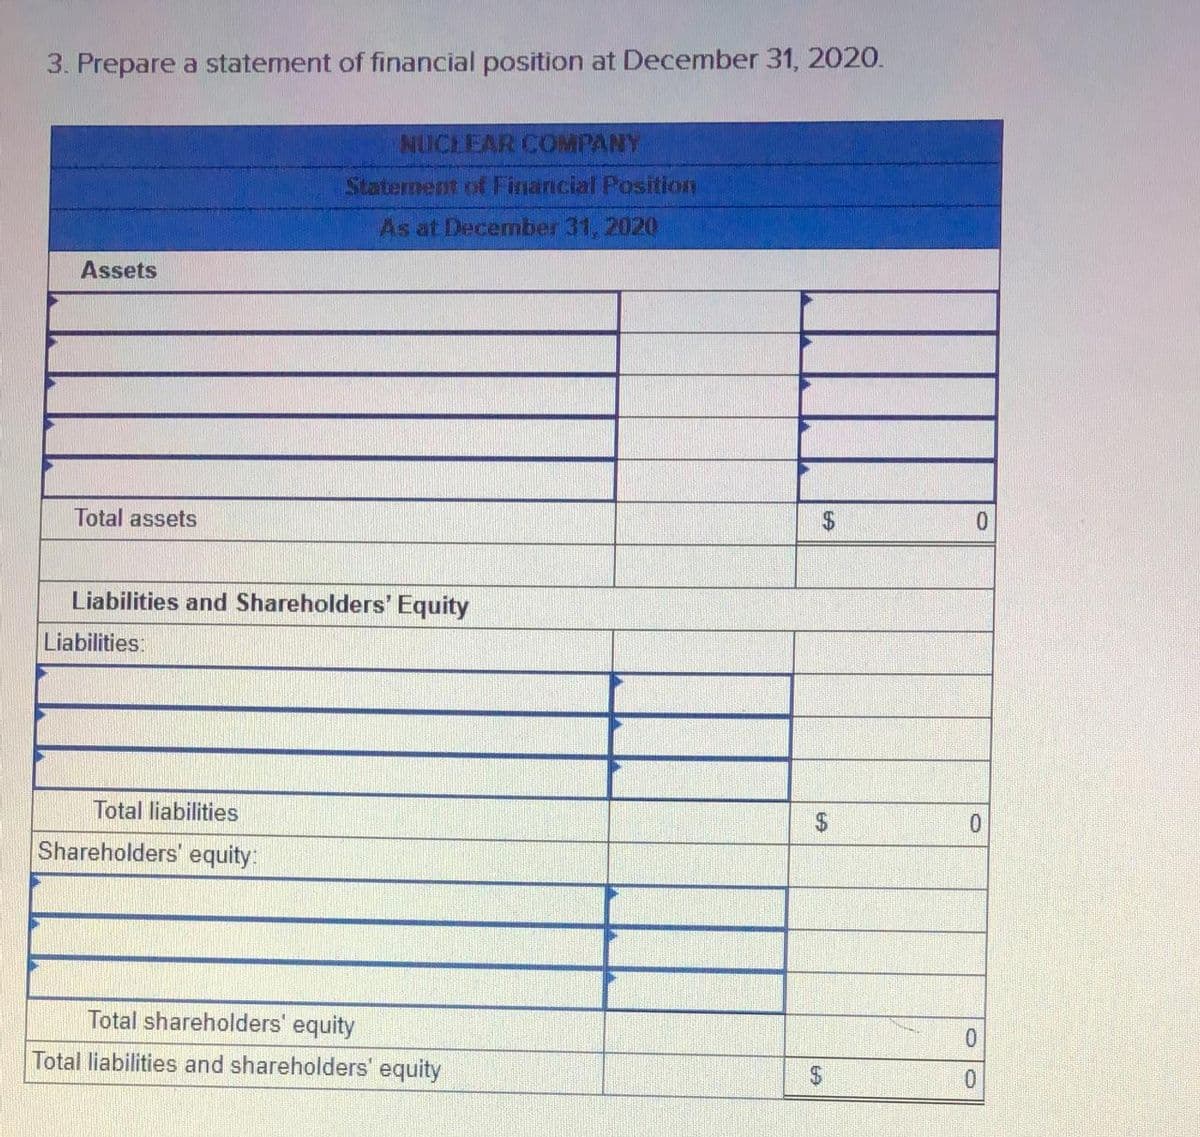 3. Prepare a statement of financial position at December 31, 2020.
NUCLEAR COMPANY
Staterment of Financial Position
As at December 31, 2020
Assets
Total assets
0.
Liabilities and Shareholders' Equity
Liabilities:
Total liabilities
Shareholders' equity:
Total shareholders' equity
0.
Total liabilities and shareholders' equity
24
0.
